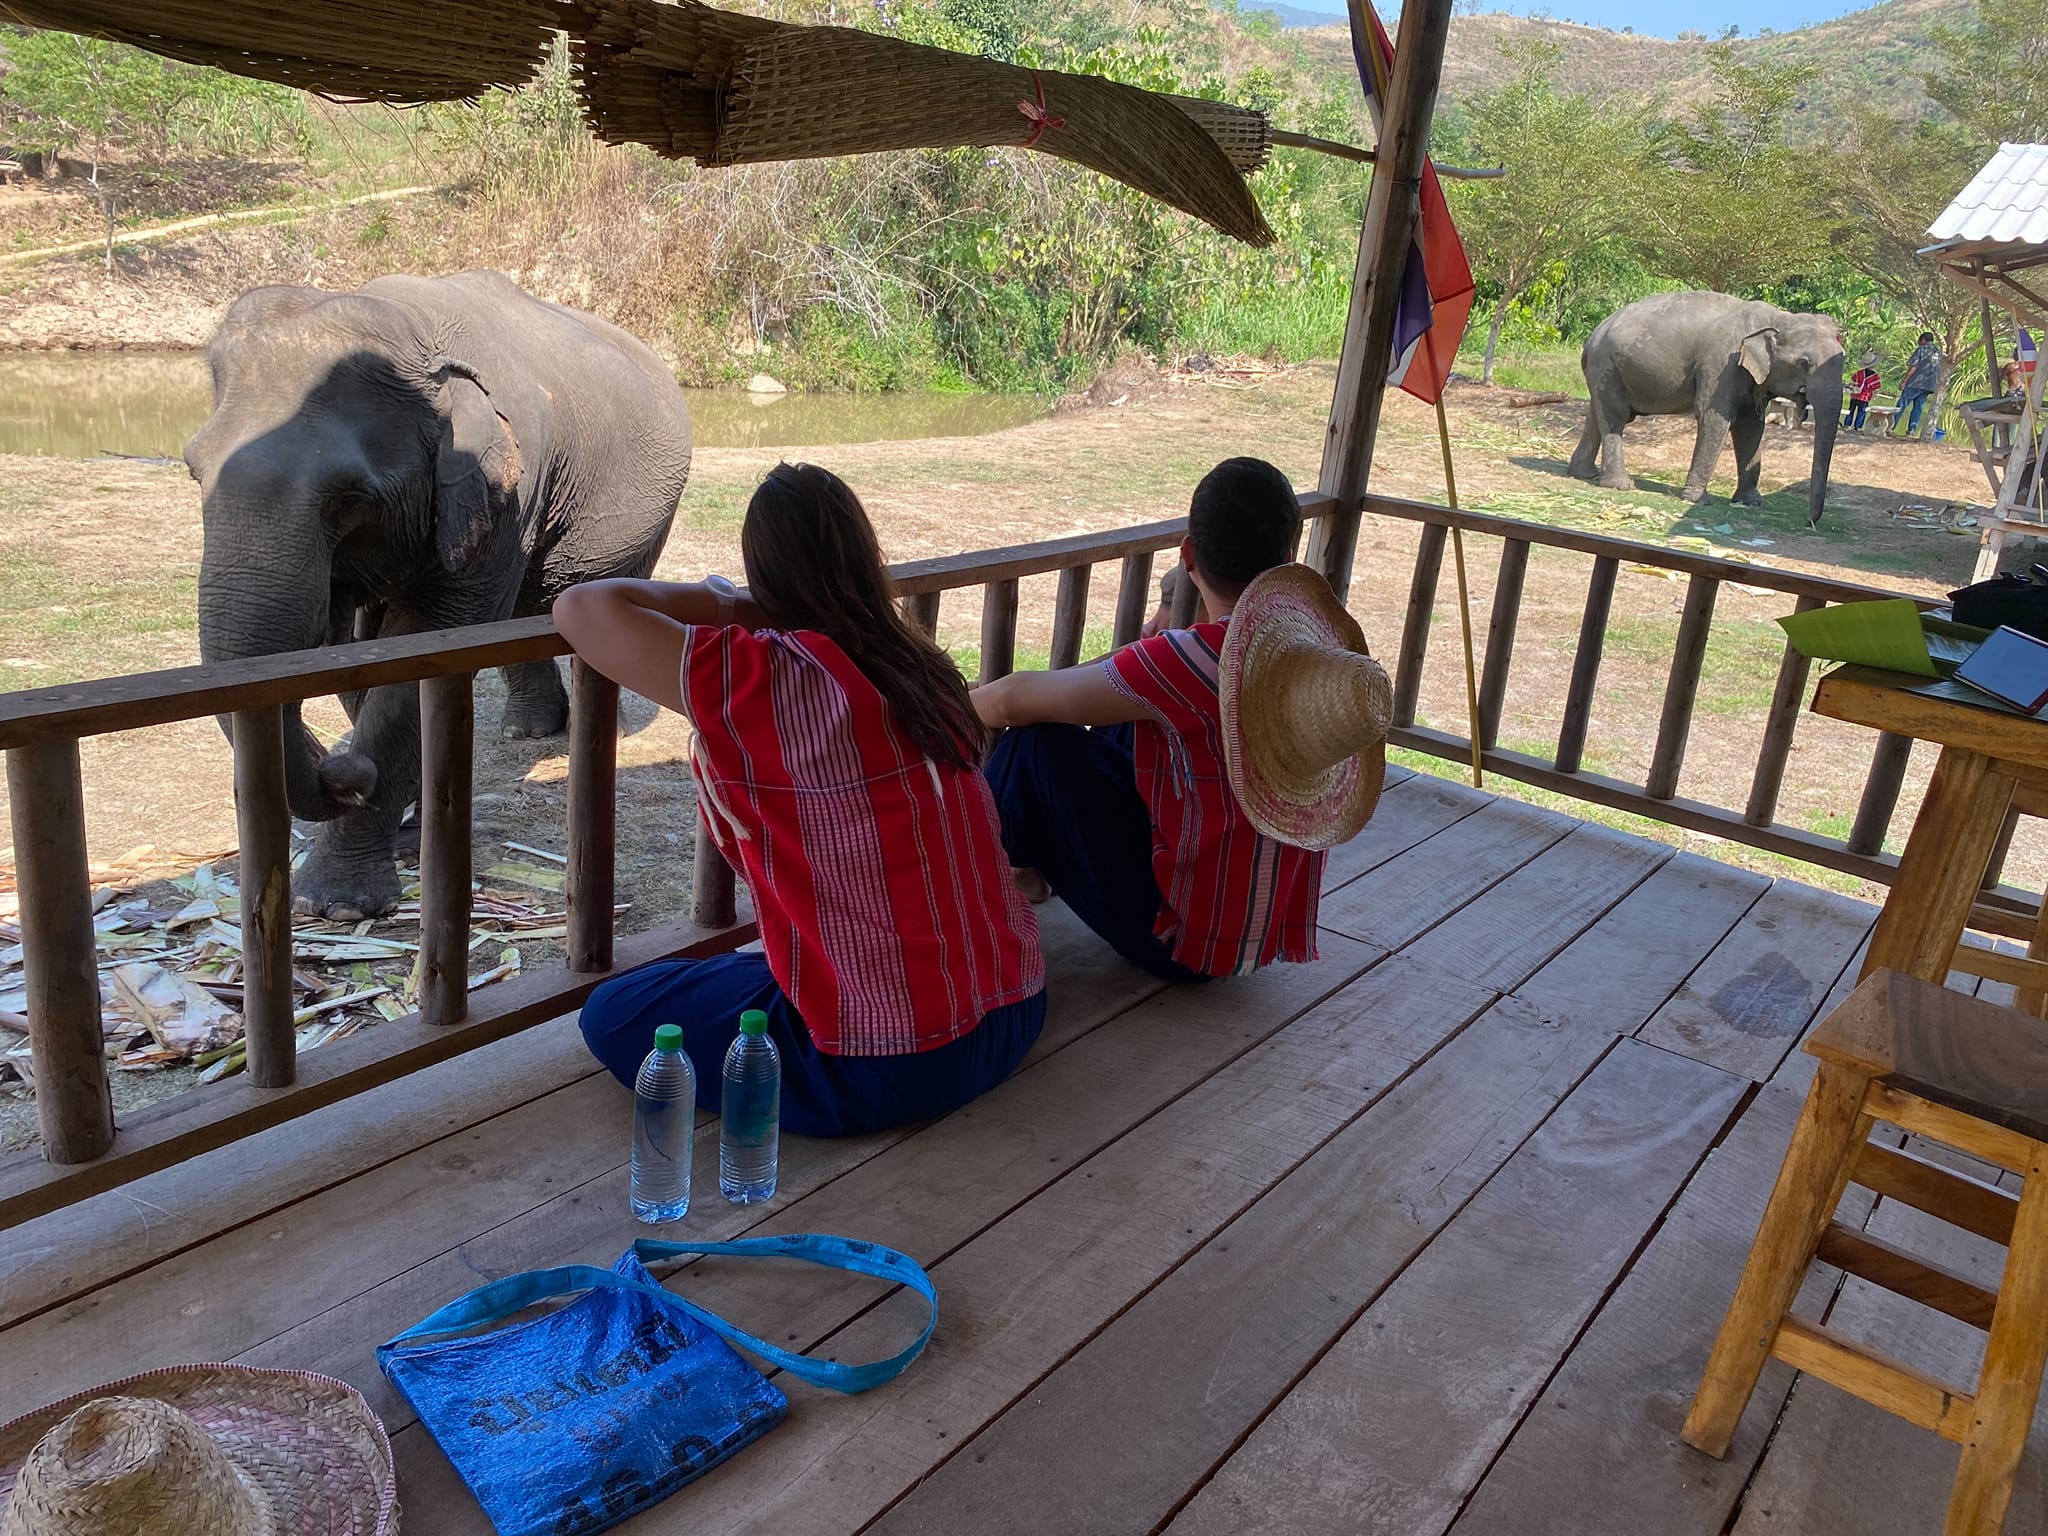 ethical encounter with elephants in chiang rai